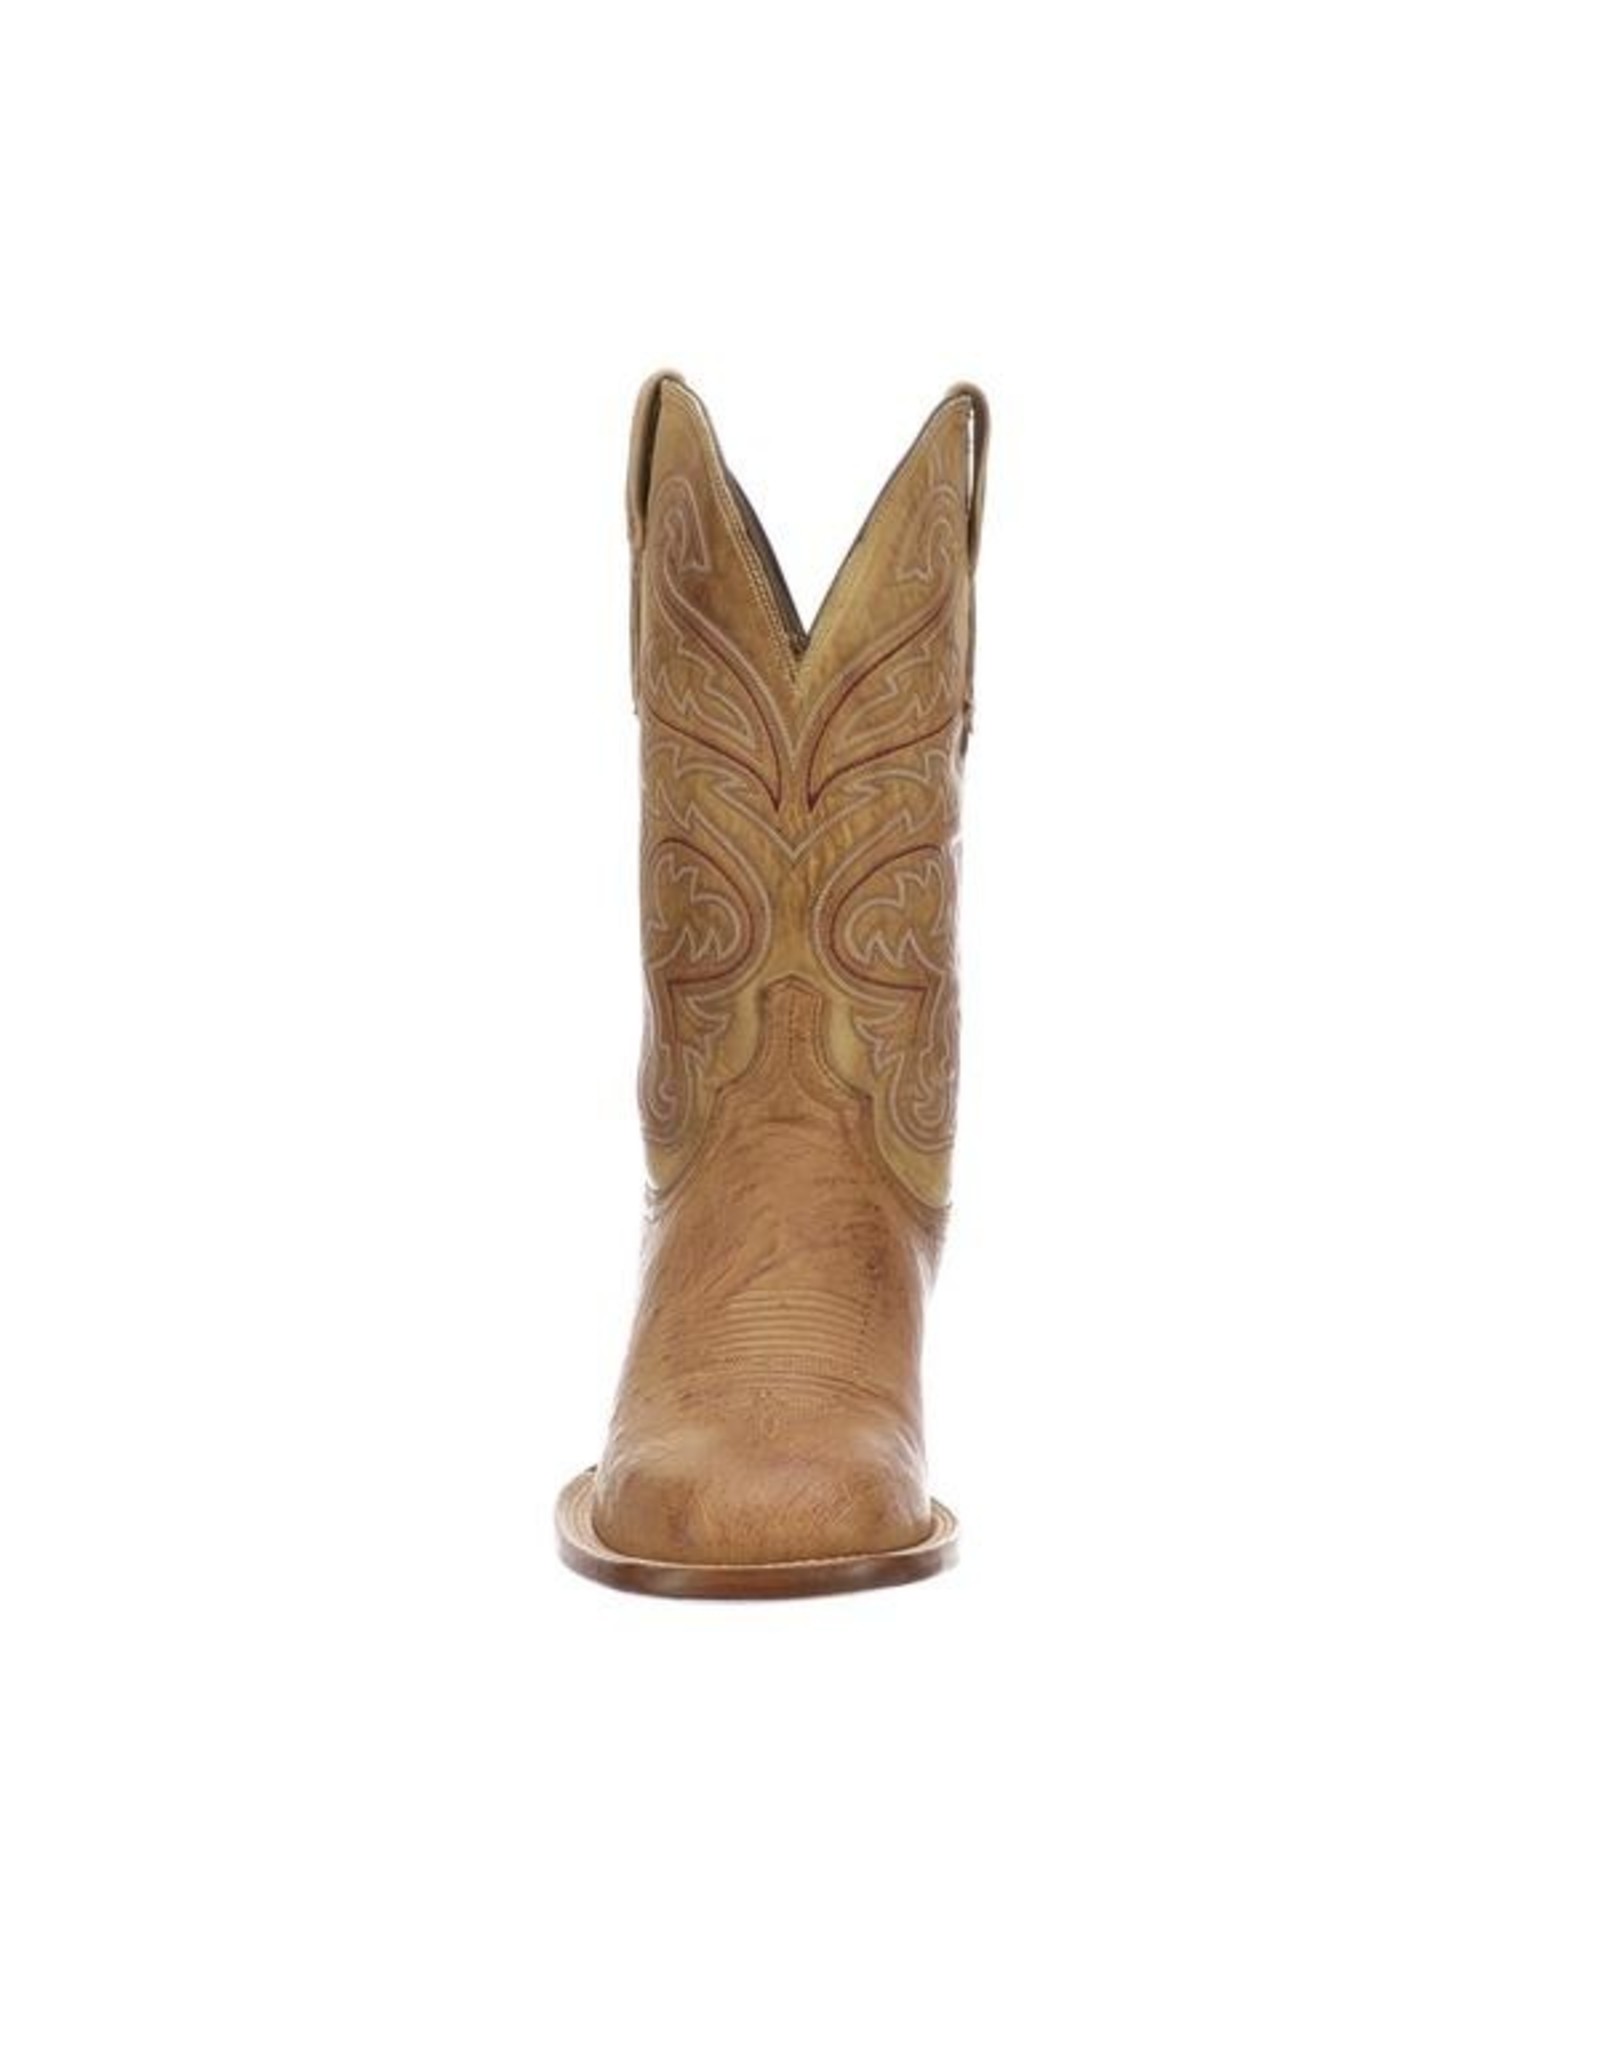 Boots-Men LUCCHESE CL1028.W8S  Smooth Ostritch